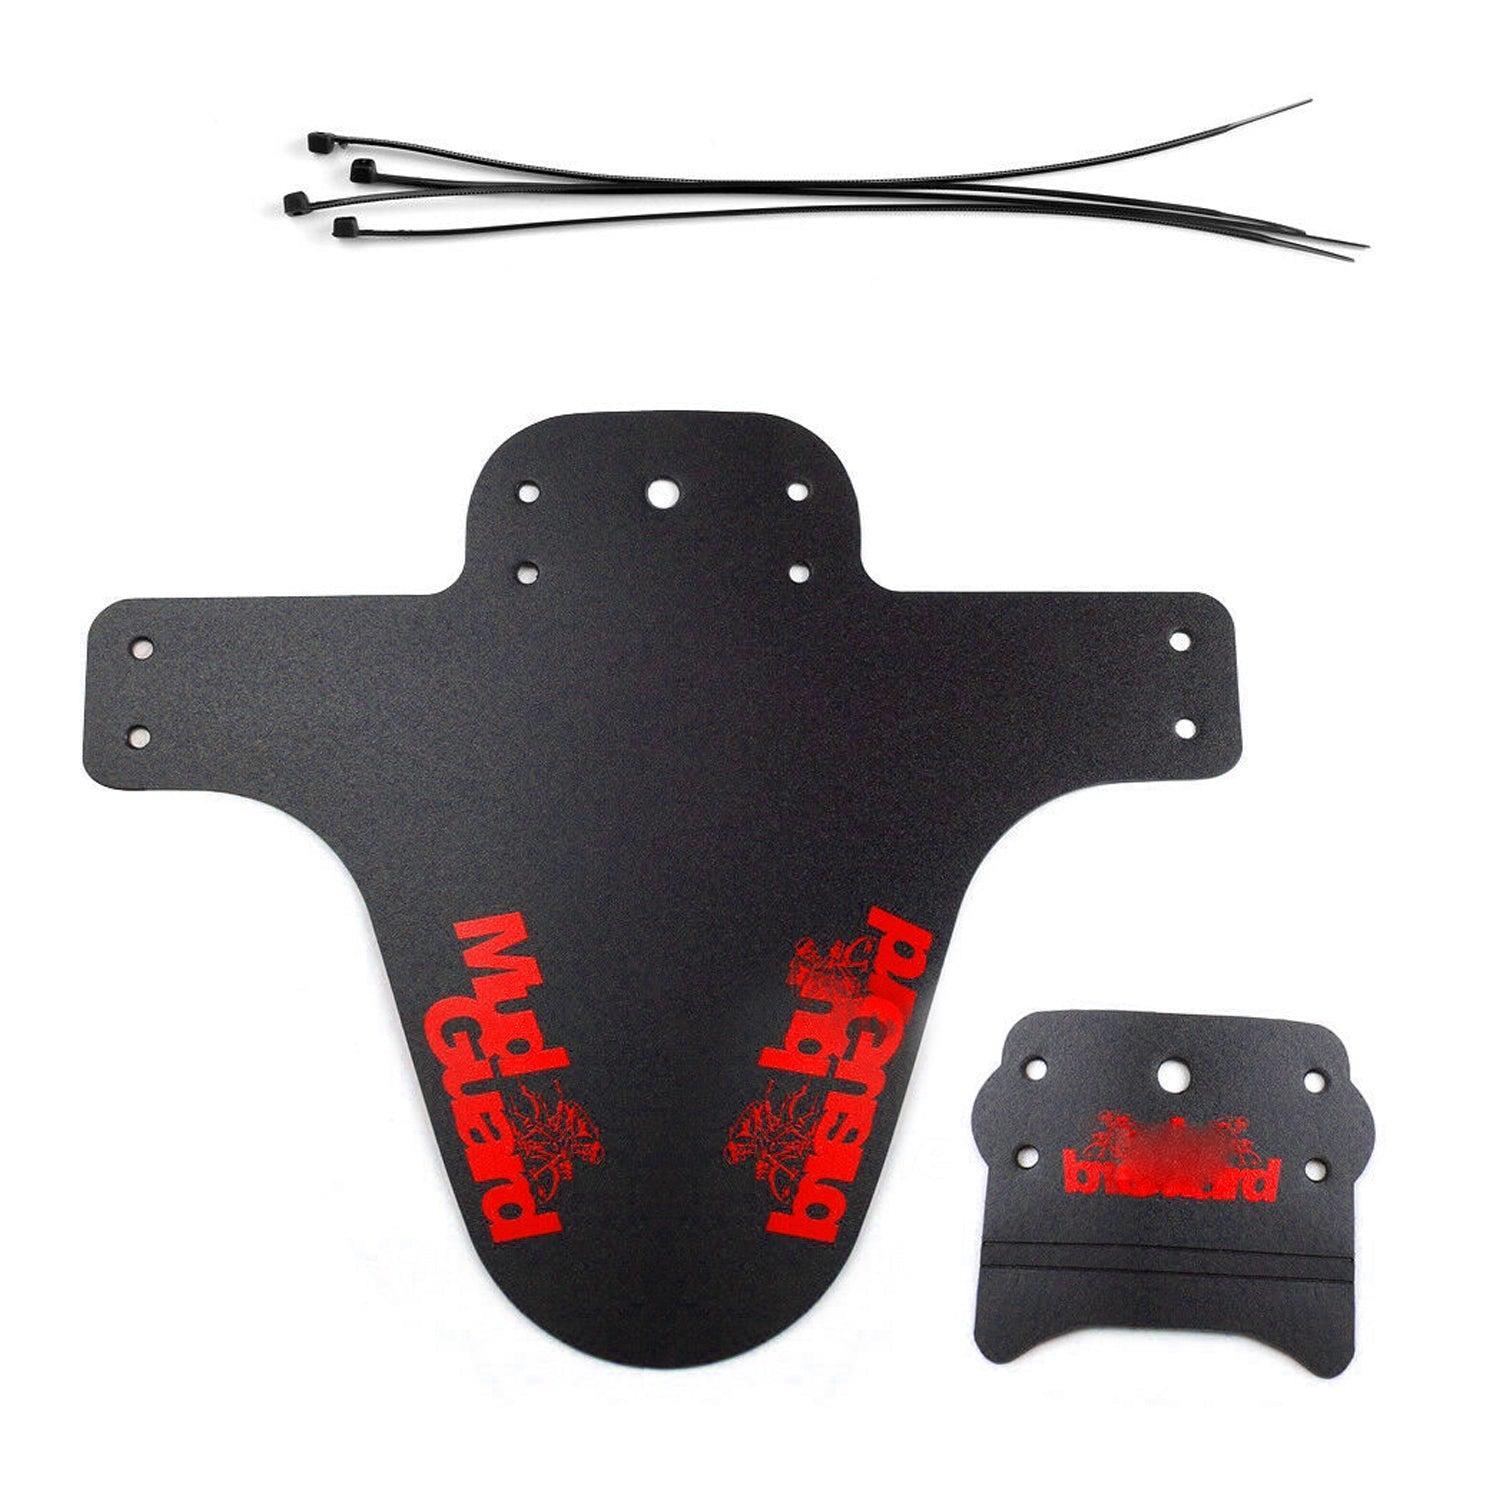 Outdoor Bike Cycling Front and Rear Fender Component Set